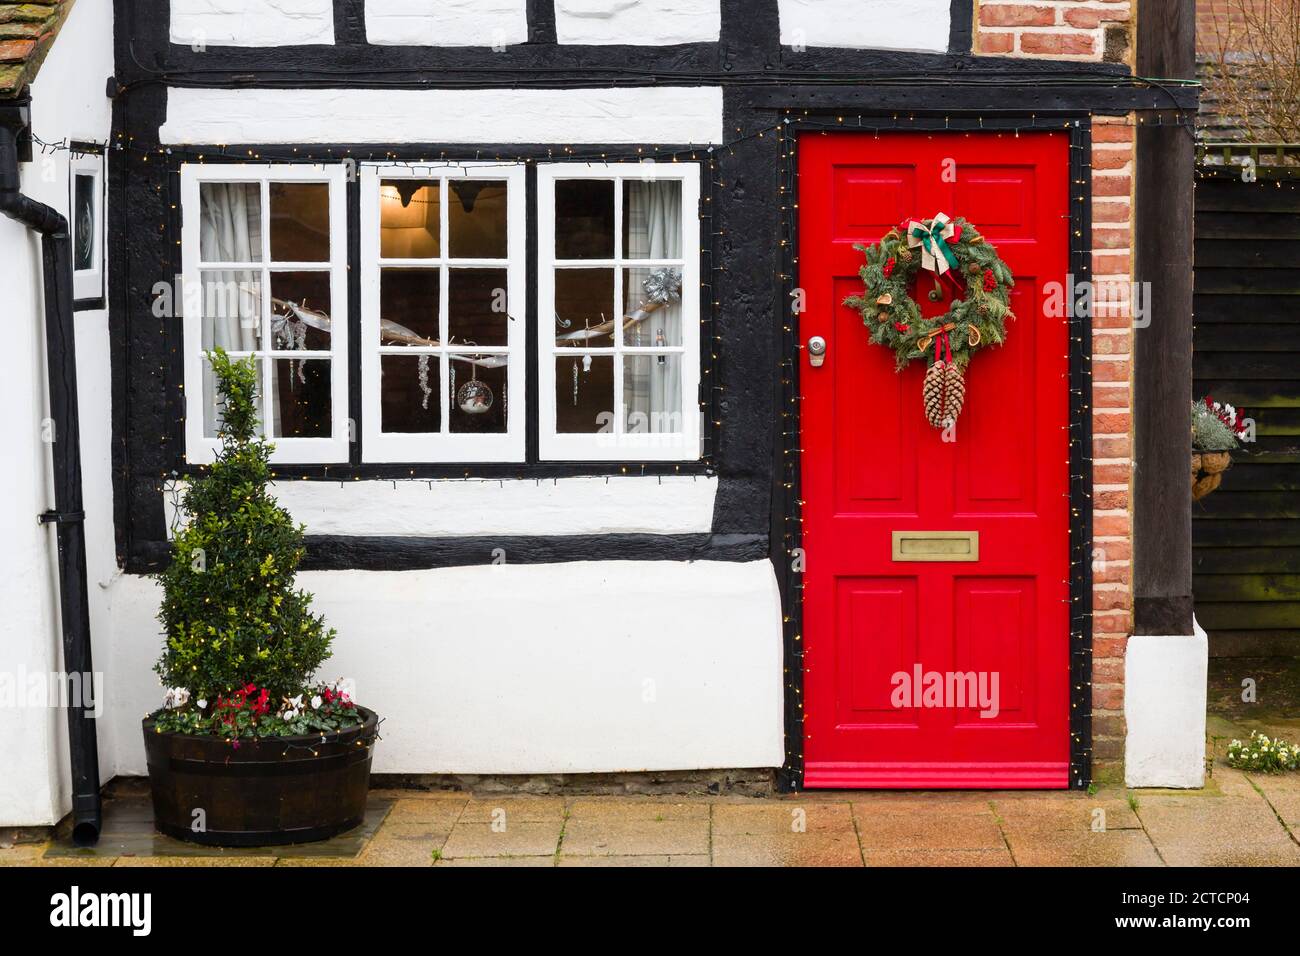 WINSLOW, UK - December 26, 2019. Christmas wreath and decorations outside heritage home, cottage house in UK, winter street scene Stock Photo